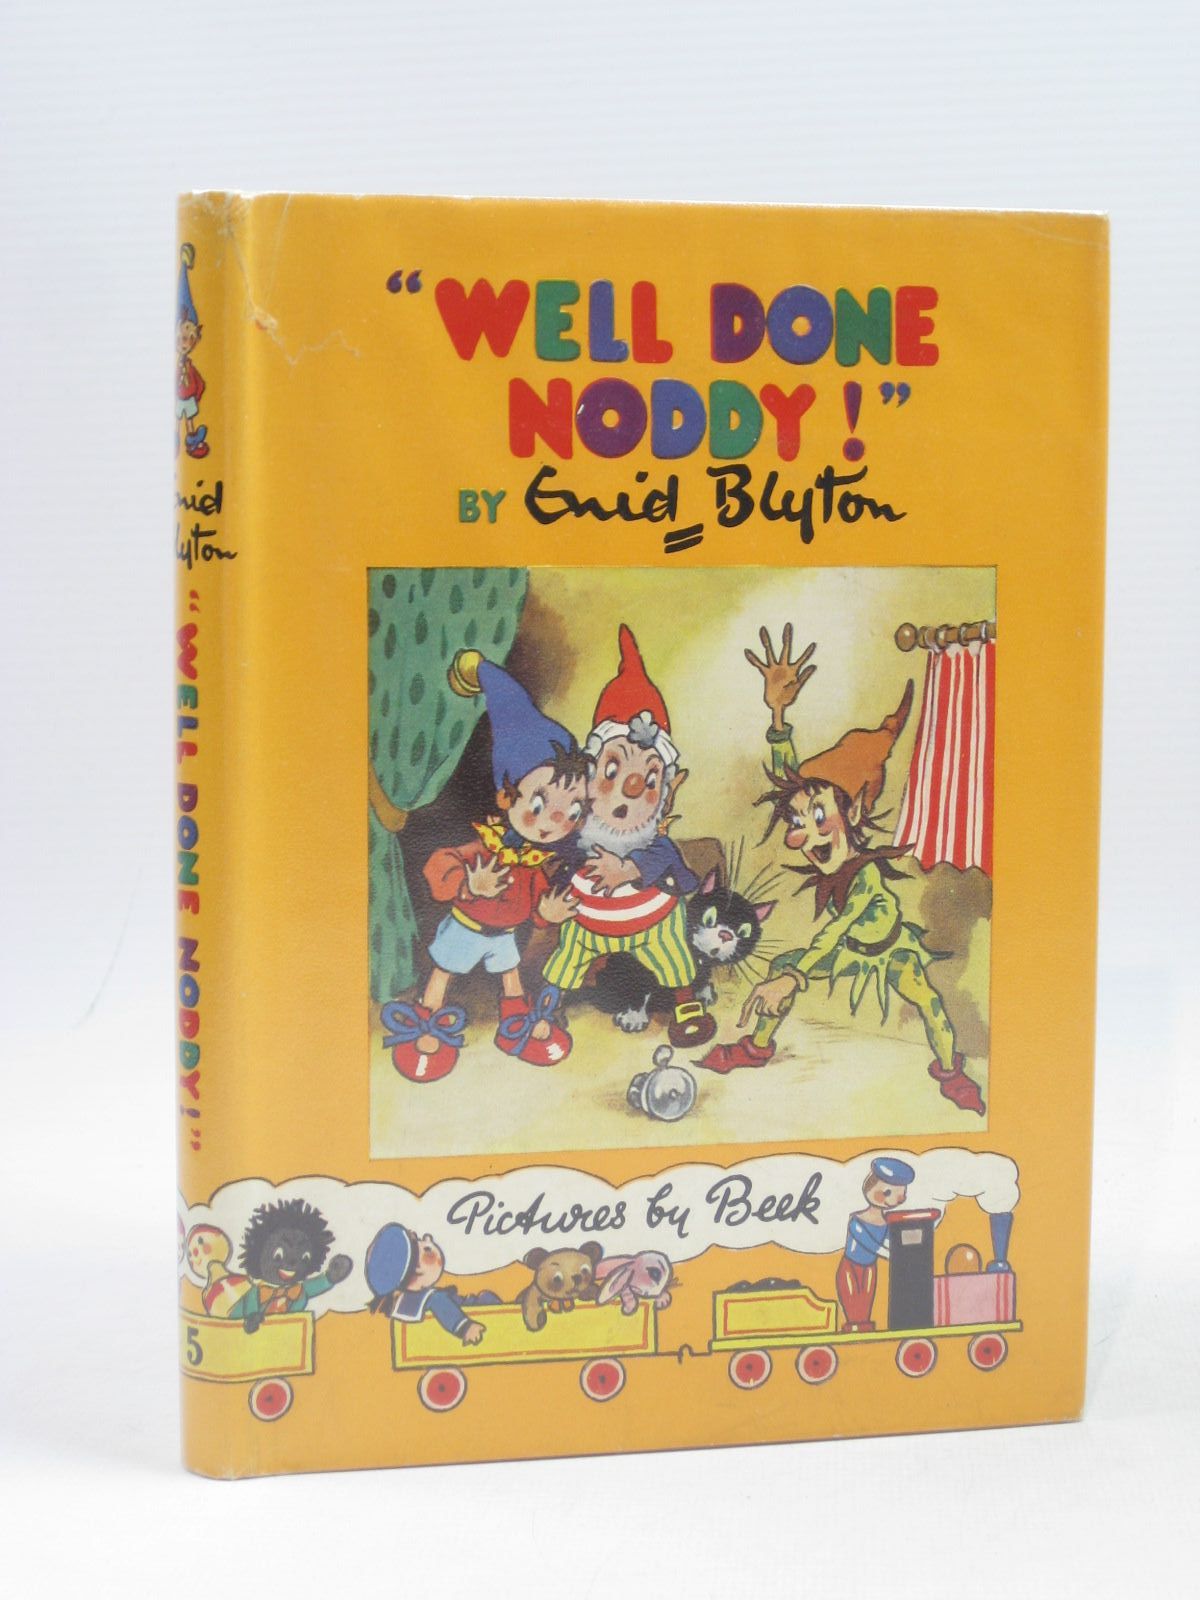 Cover of WELL DONE NODDY! by Enid Blyton